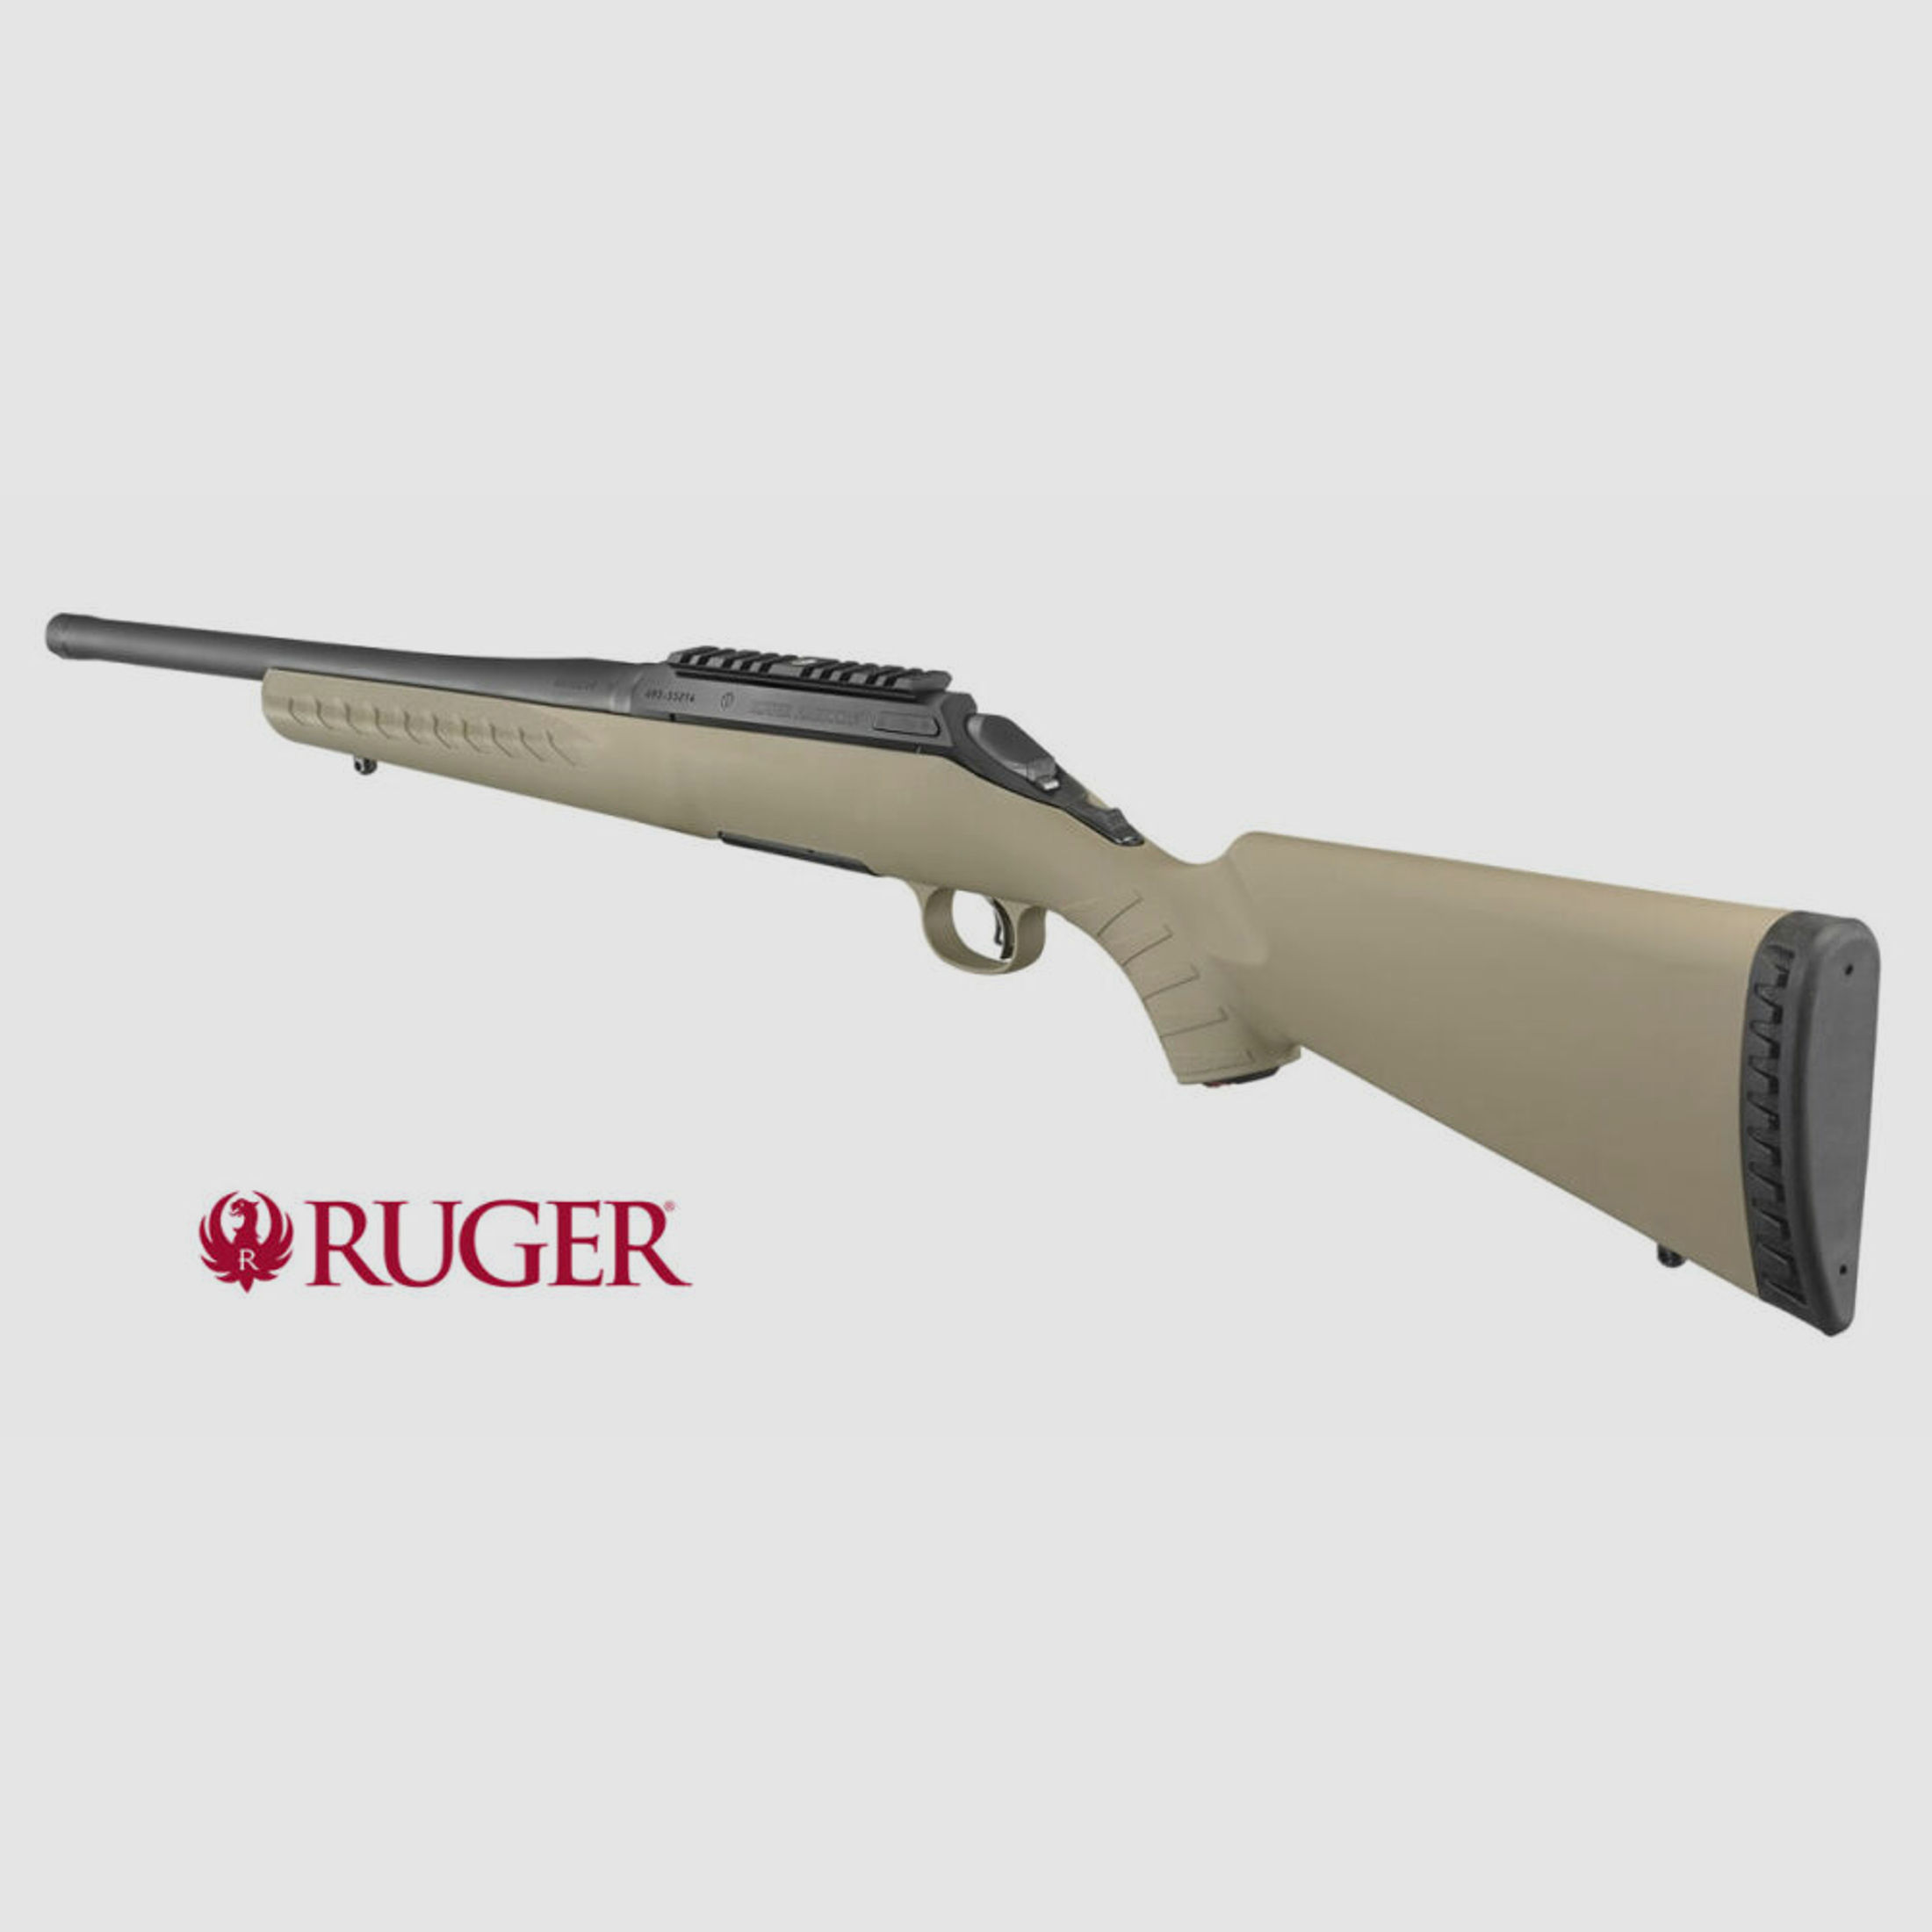 RUGER American Rifle Ranch Ruger Repetierbüchse Kaliber 223Rem